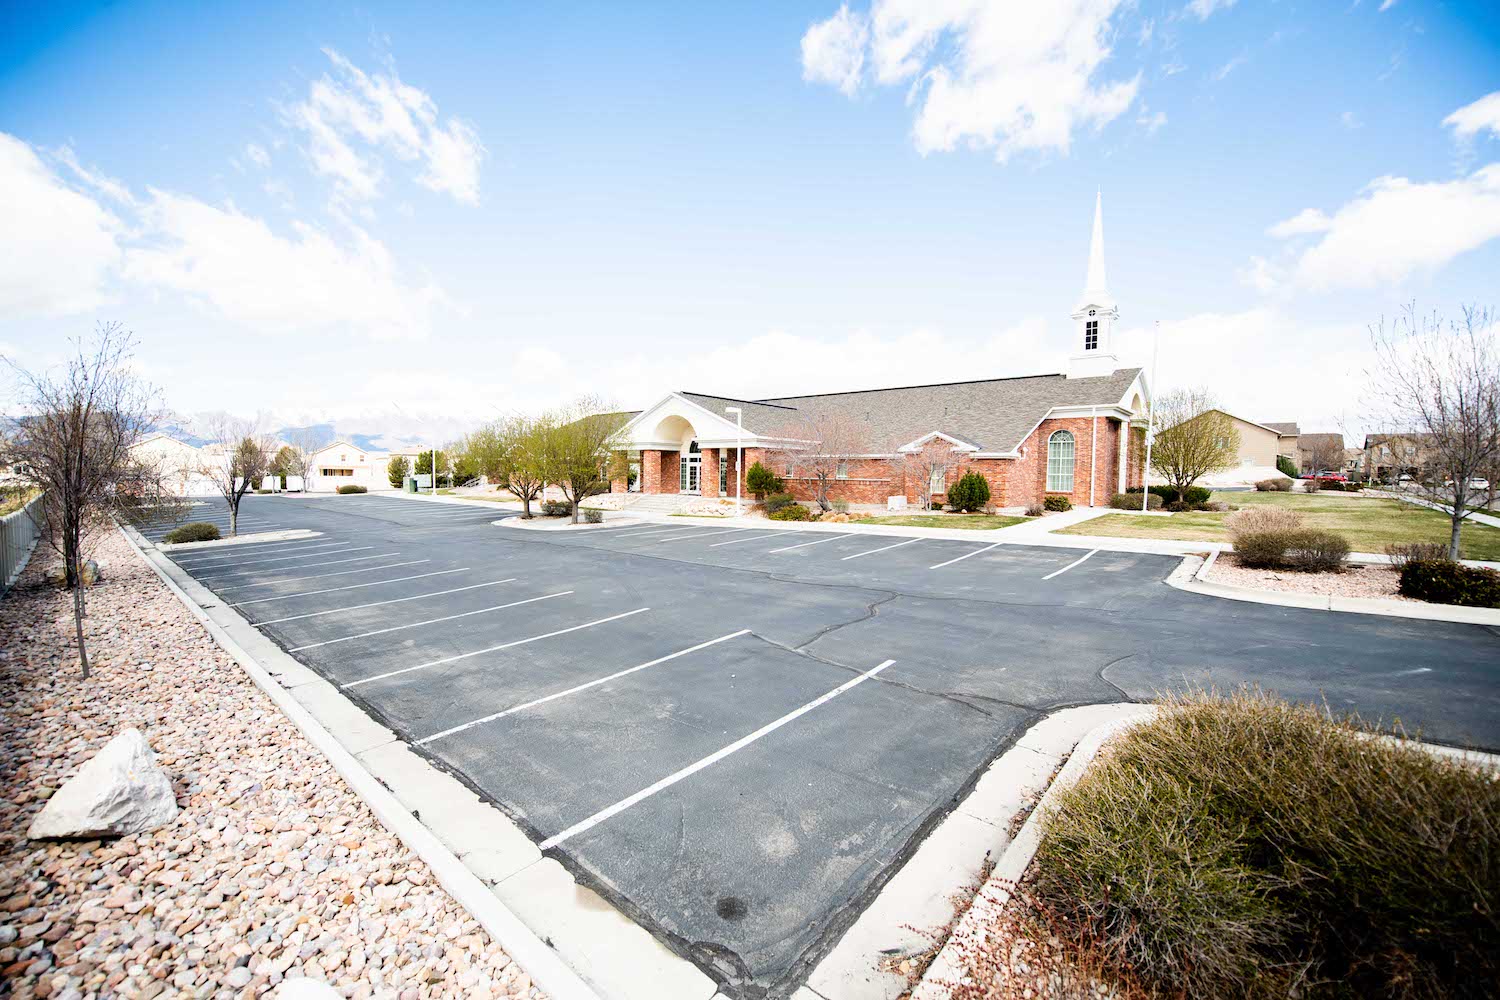 This is a photo of an empty church parking lot. Some vanlife enthusiasts have suggested the parking lot at a place of worship is a spot you won't get kicked out. | Matt Winkelmeyer/Getty Images